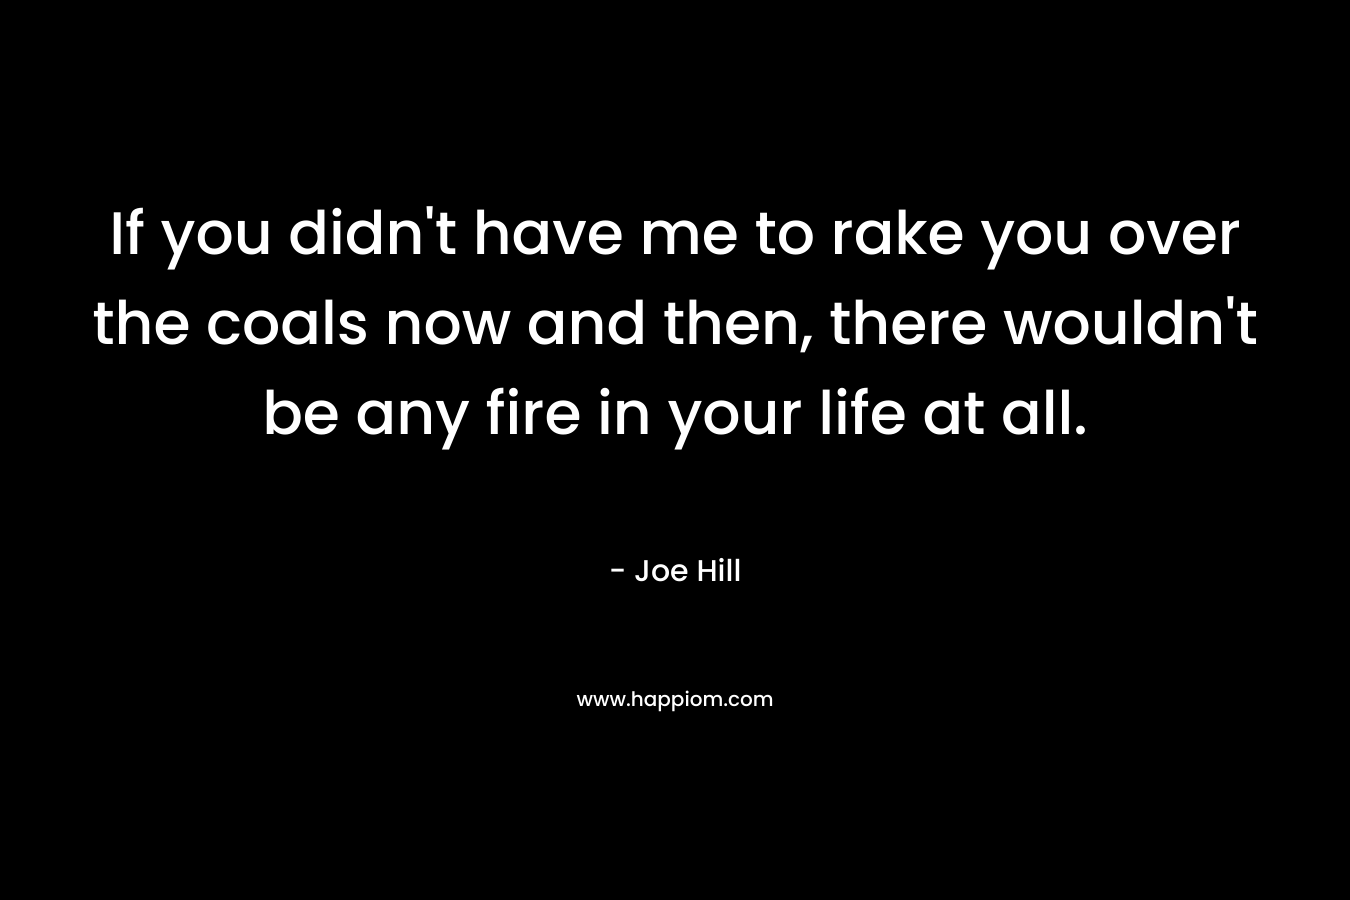 If you didn’t have me to rake you over the coals now and then, there wouldn’t be any fire in your life at all. – Joe Hill